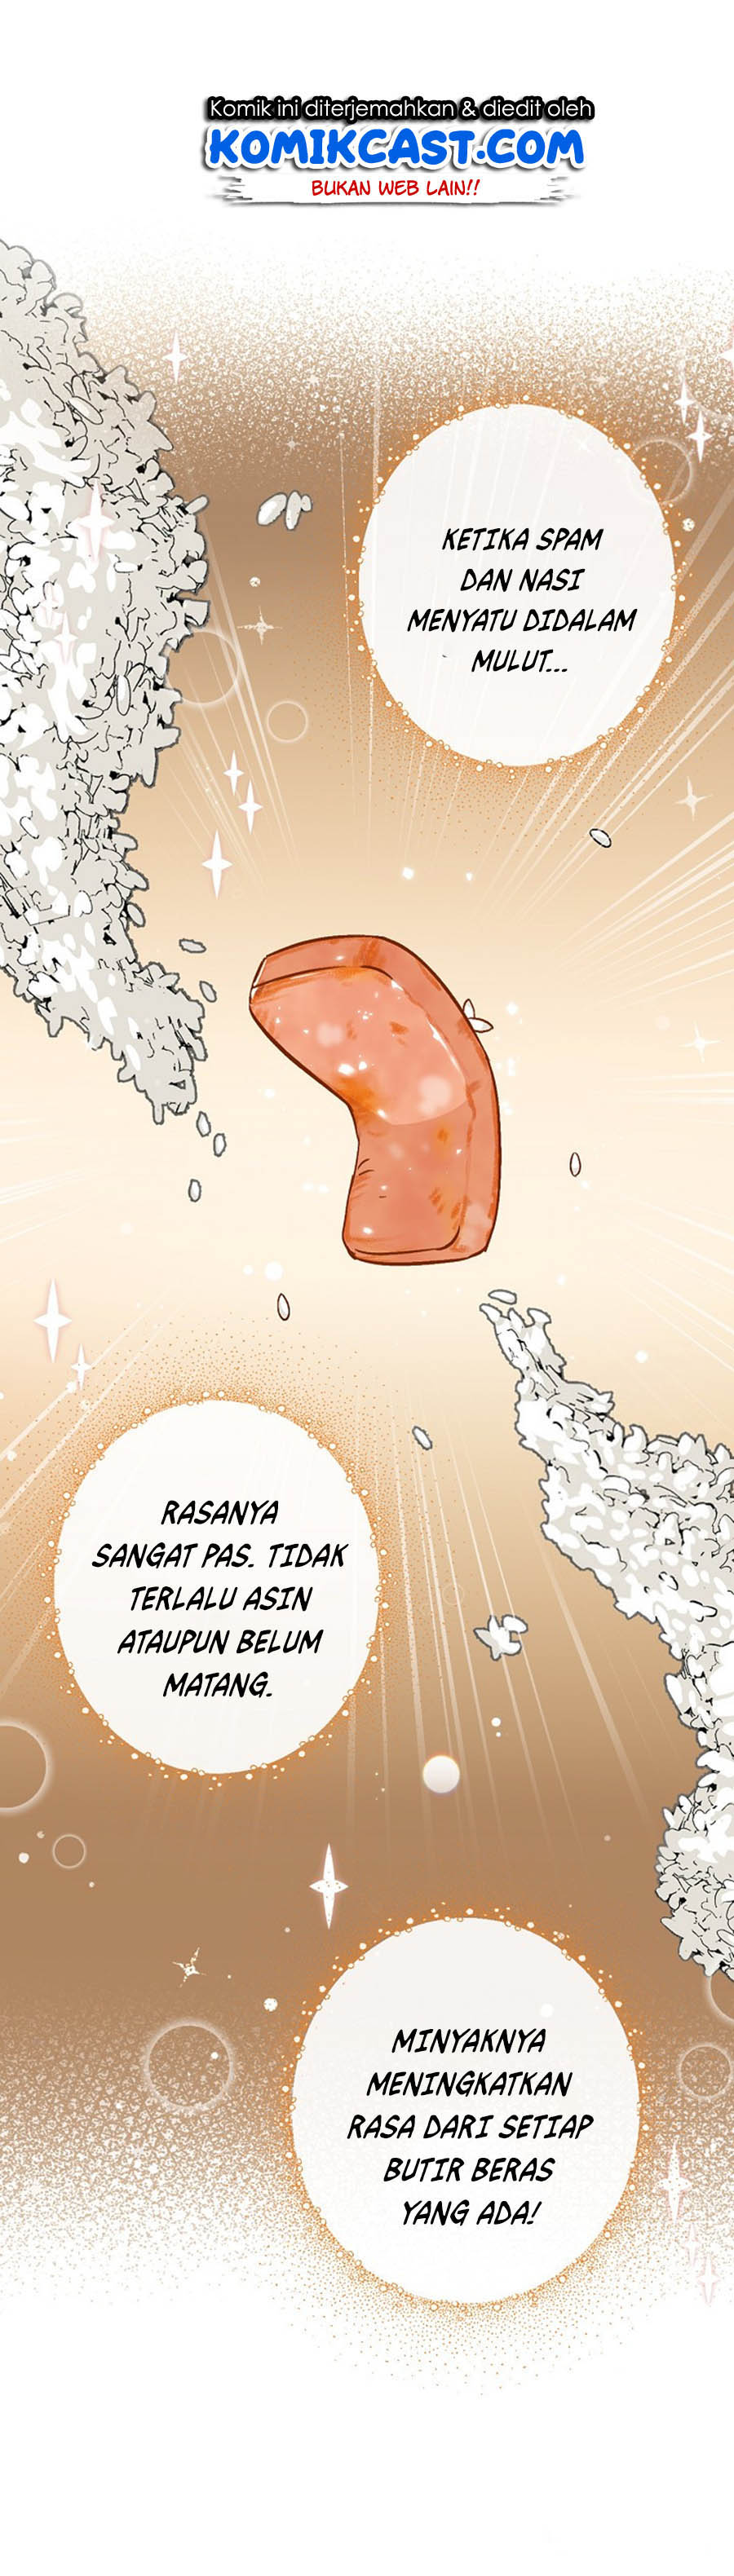 Leveling Up, by Only Eating! Chapter 30